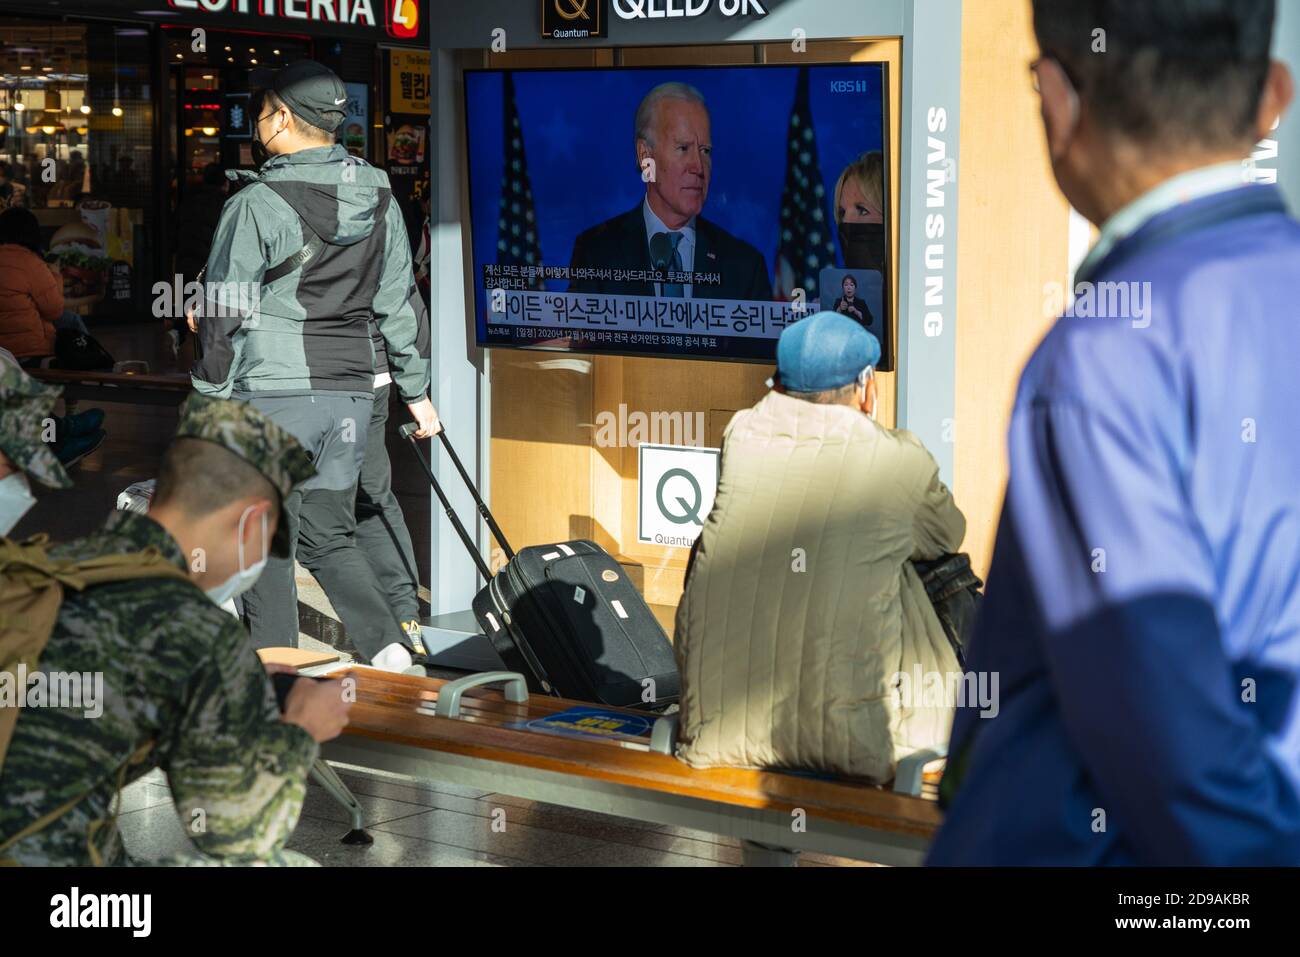 People at Seoul Train Station watch presidential candidate, Joe Biden on TV news report during the US Presidential election on 2020 US presidential election day. Stock Photo